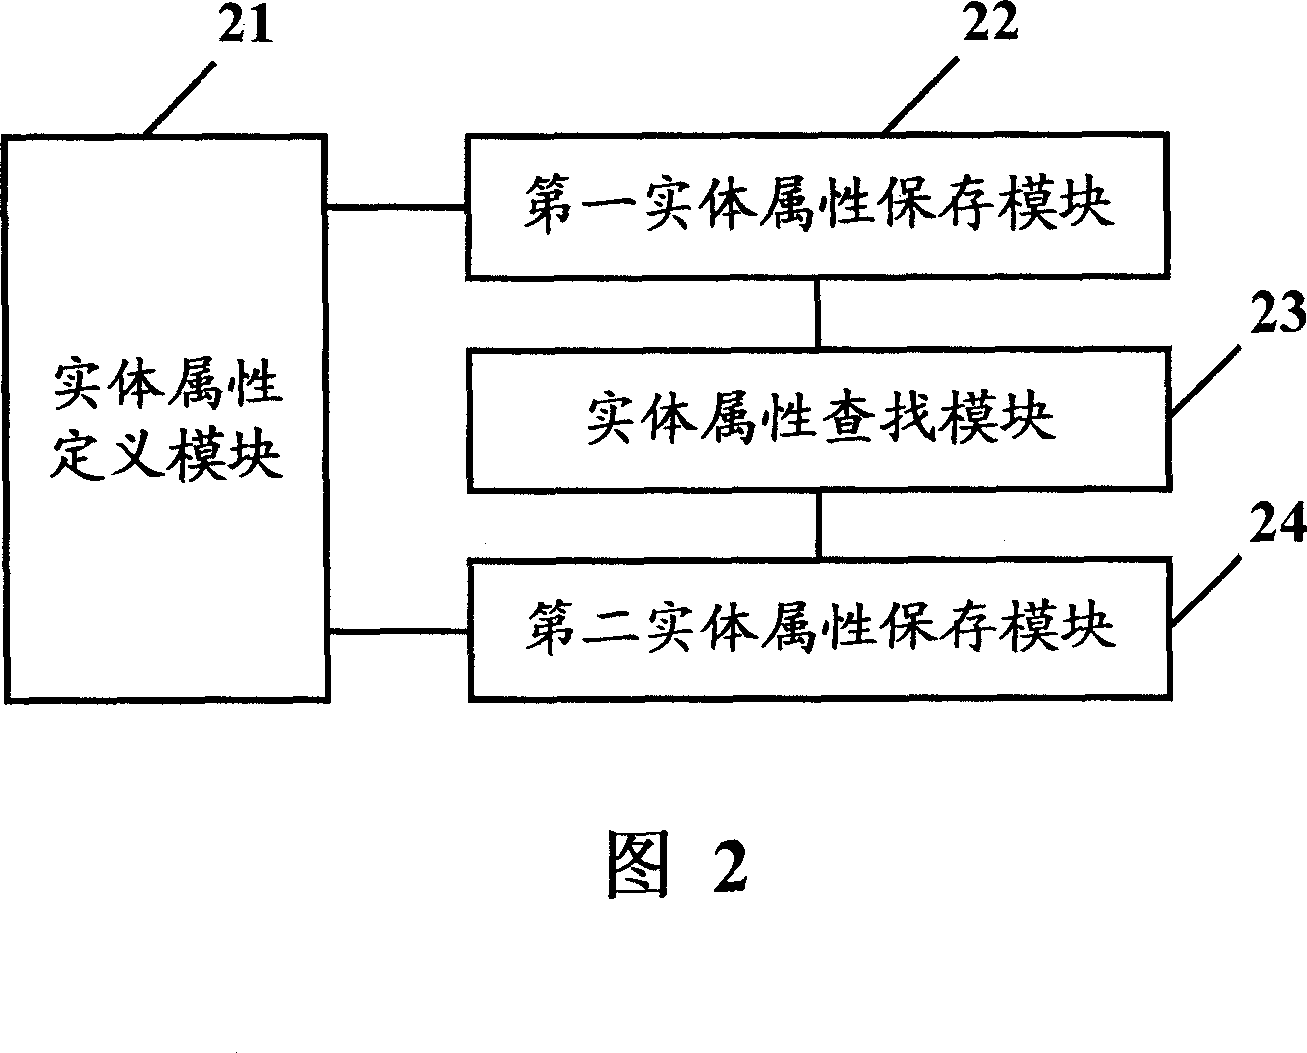 Physical attributes data process device and method